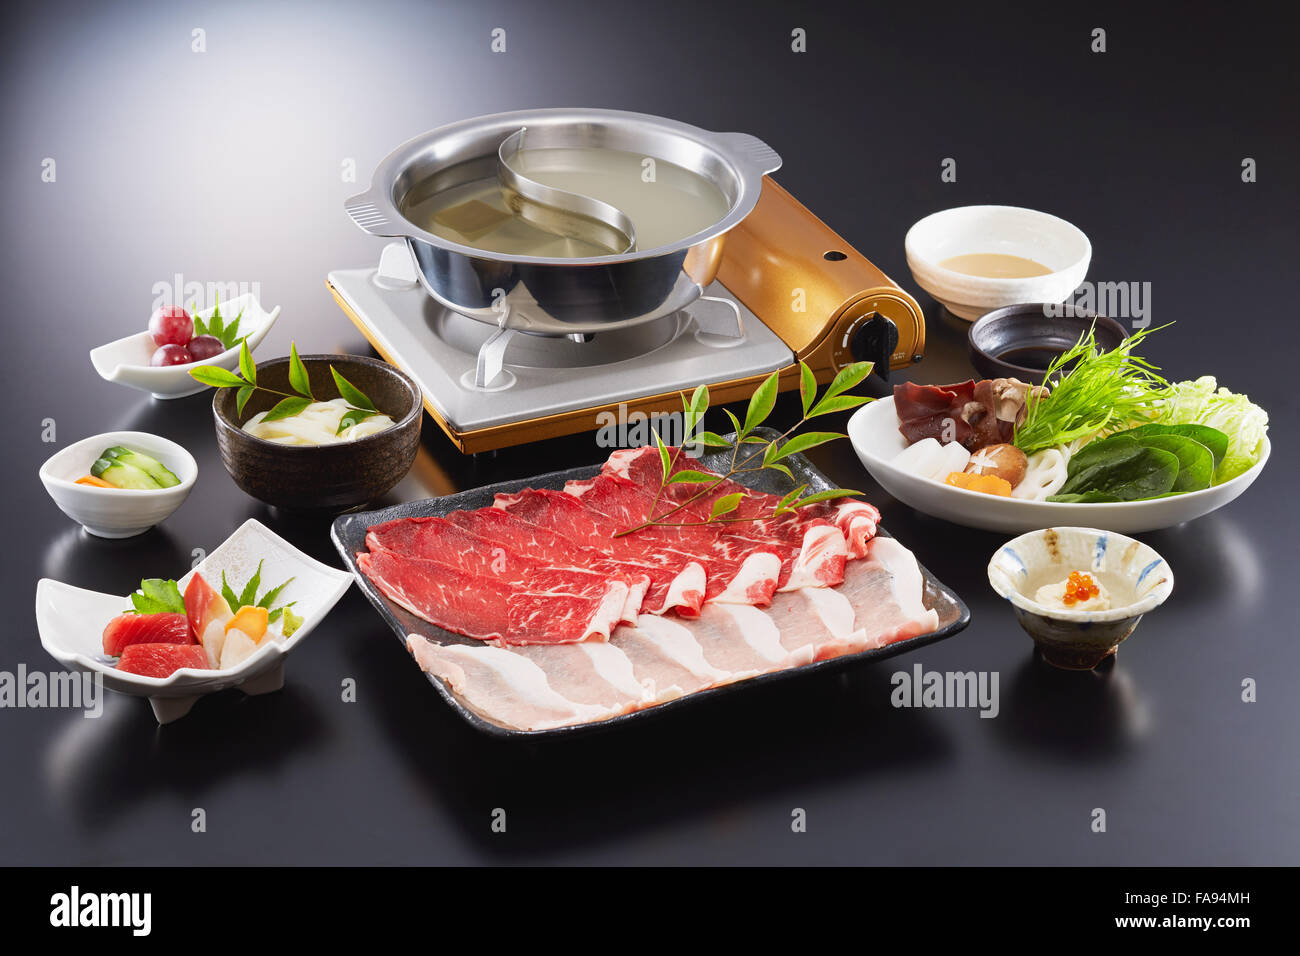 Japanese-style assorted dishes Stock Photo